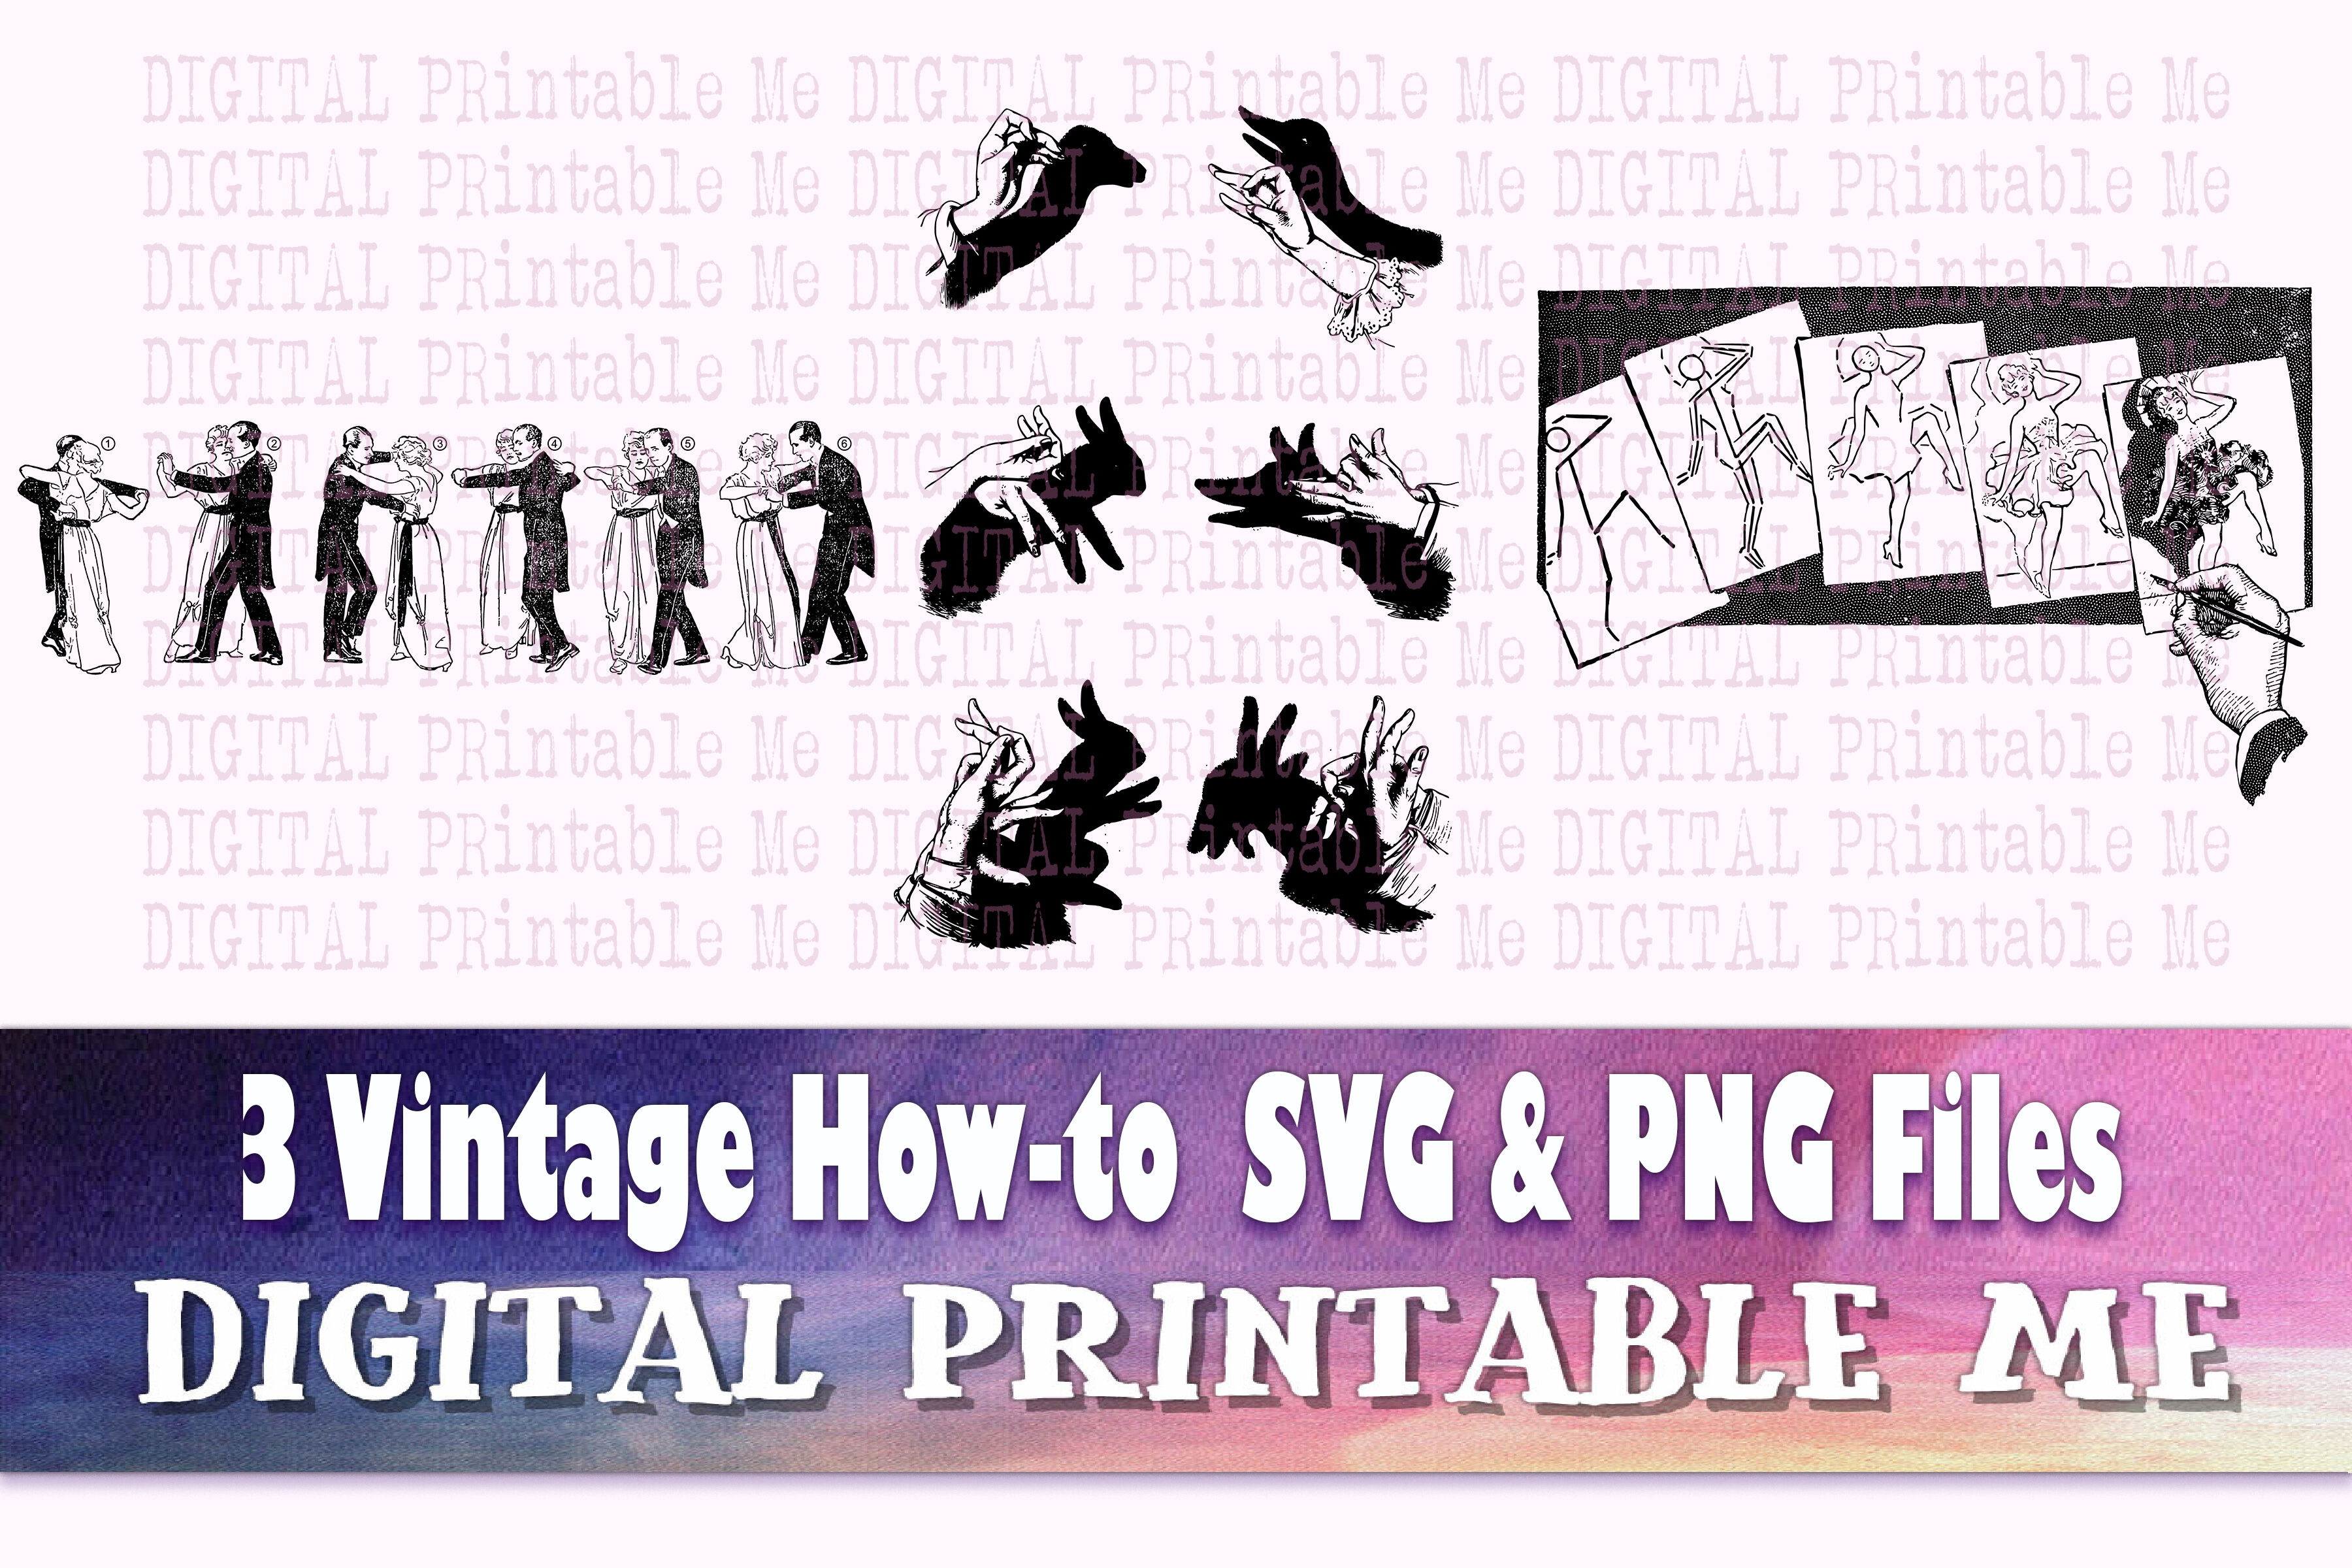 Download Vintage How To Poster Svg Png 3 Images Clip Art Pack Dance Lesson S By Digitalprintableme Thehungryjpeg Com